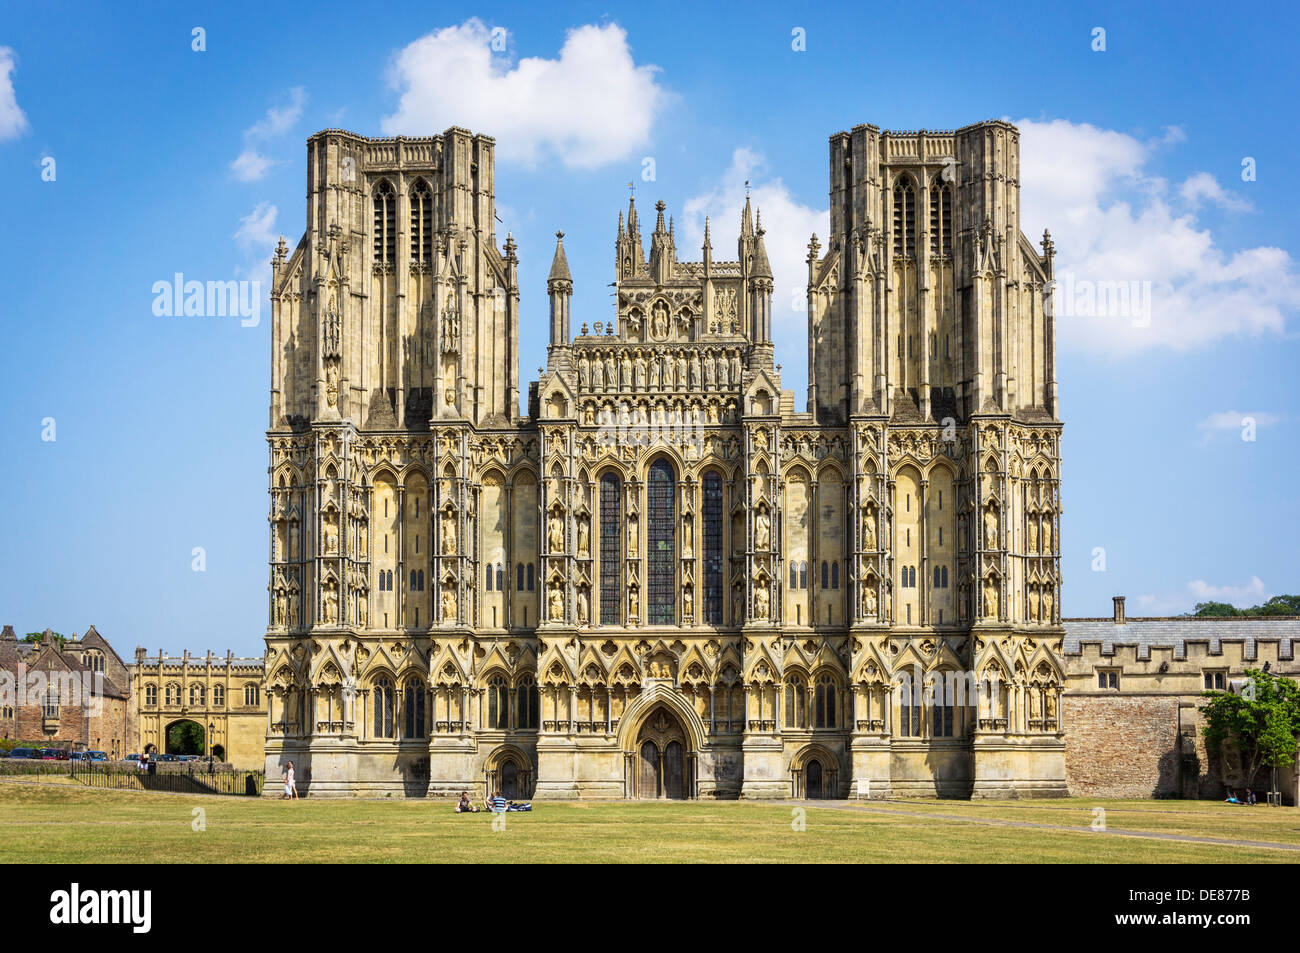 Wells Cathedral, Wells, Somerset, UK - a famous English Gothic cathedral Stock Photo